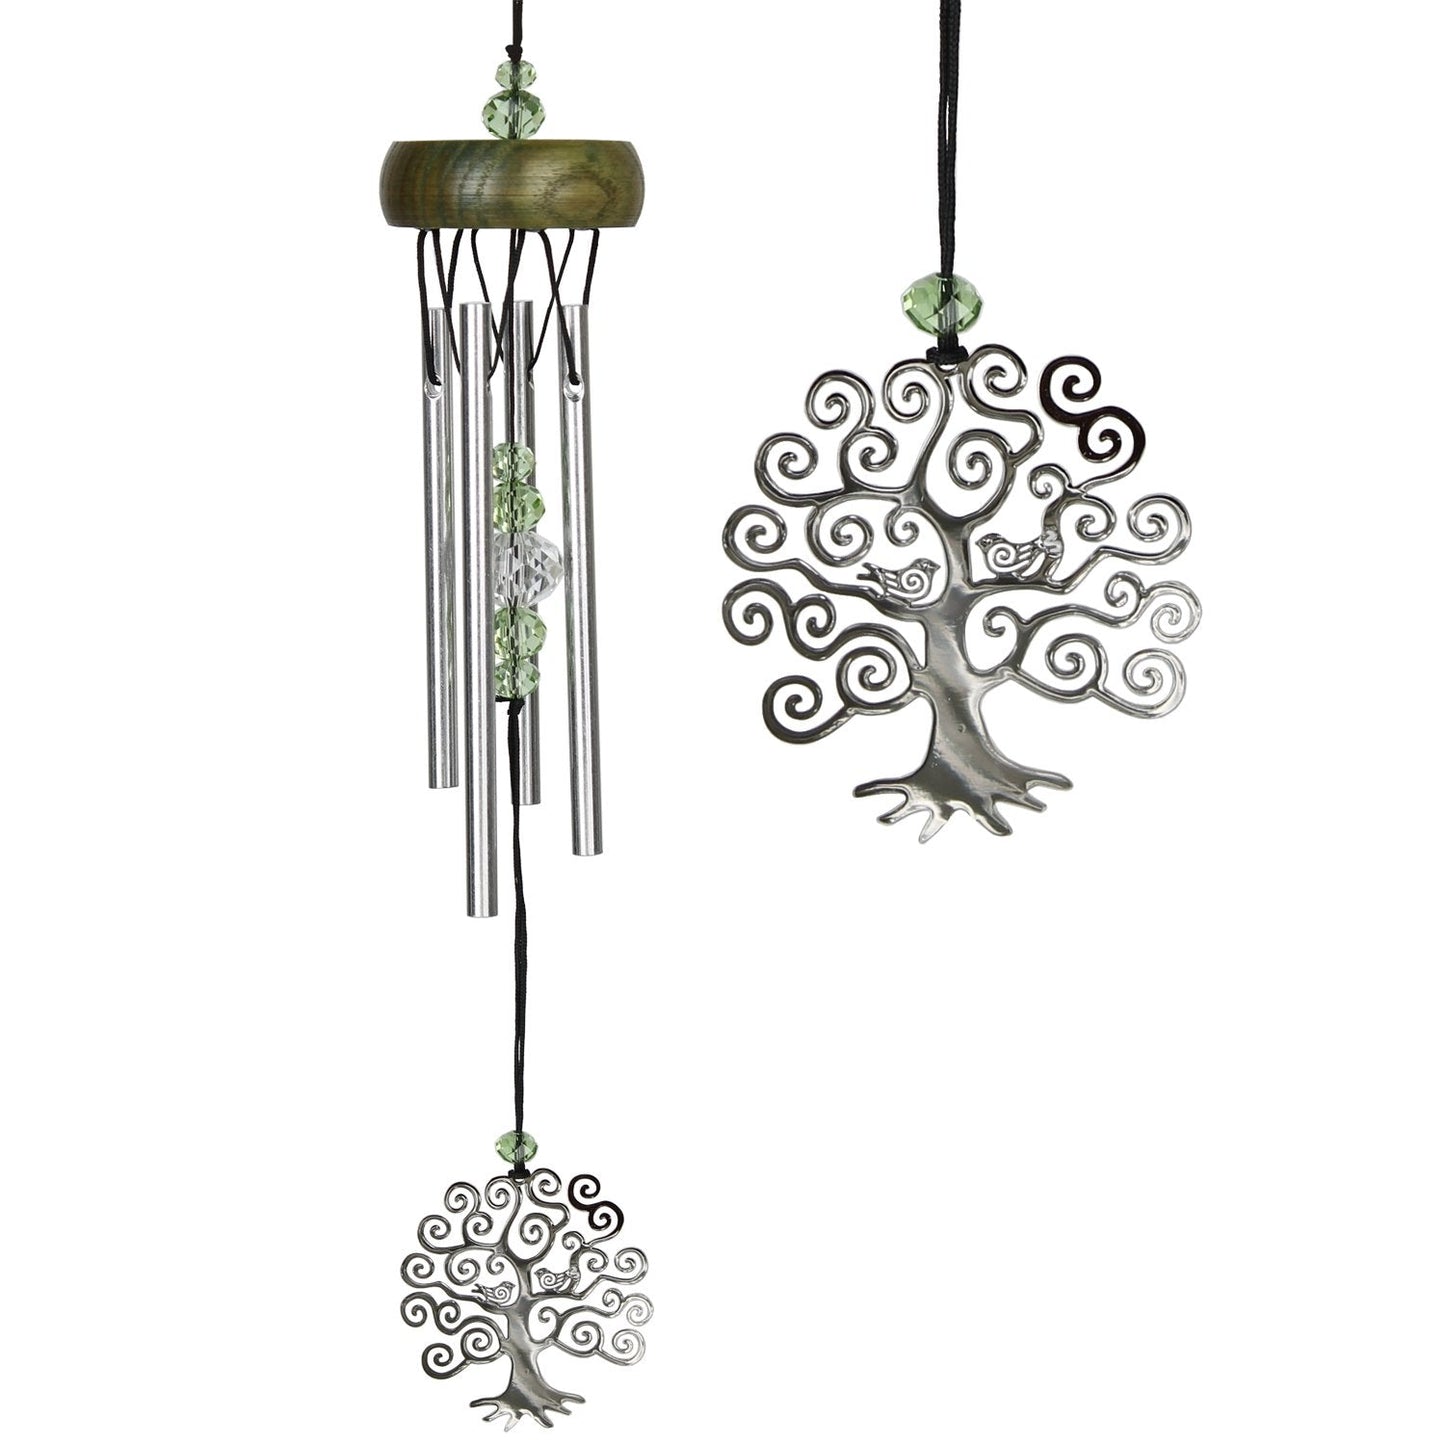 Chime Fantasy™ Wind Chime - Tree of Life - by Woodstock Chimes